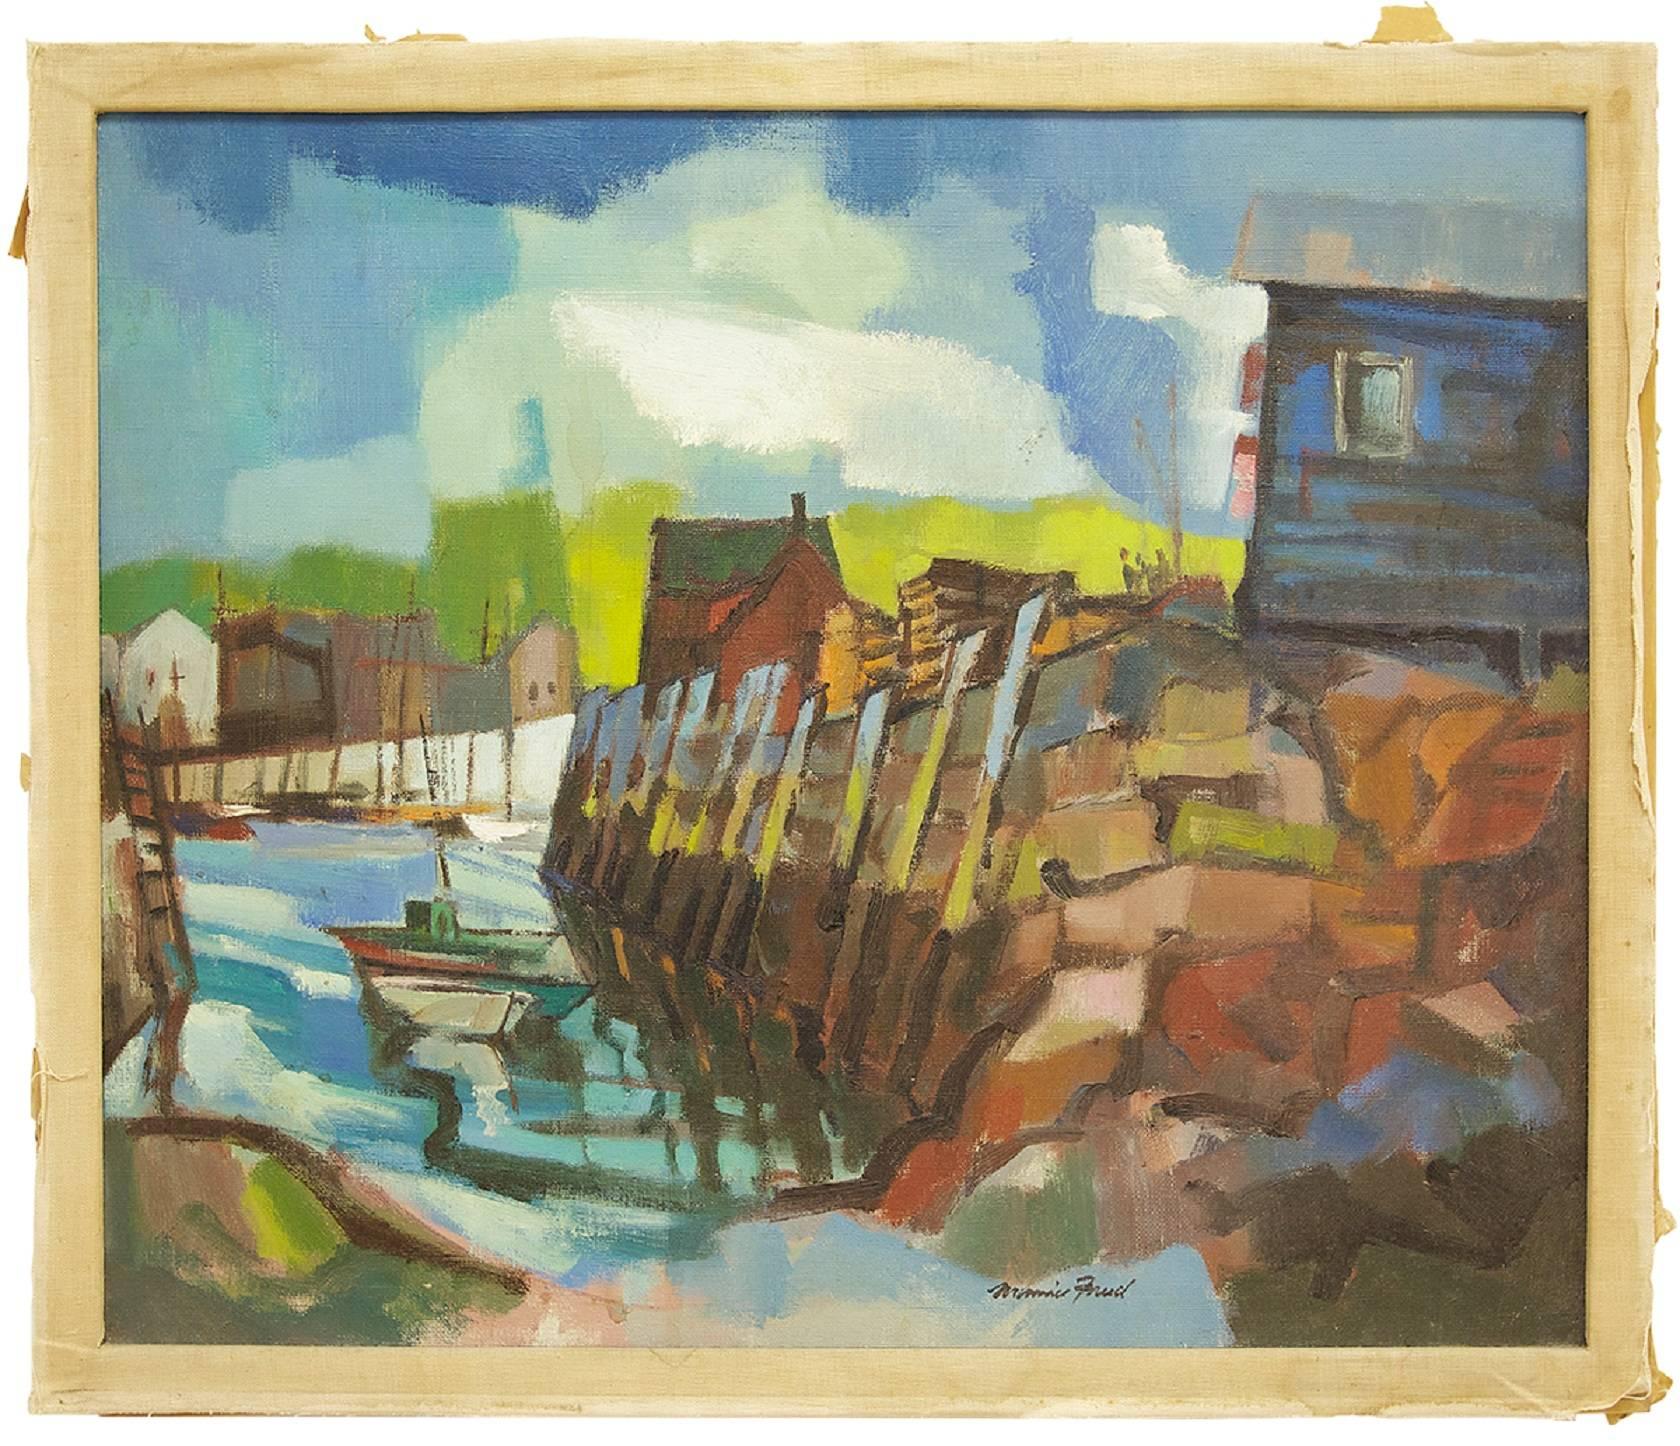 Modernist Landscape with Fishing Boat - Painting by Maurice Freed